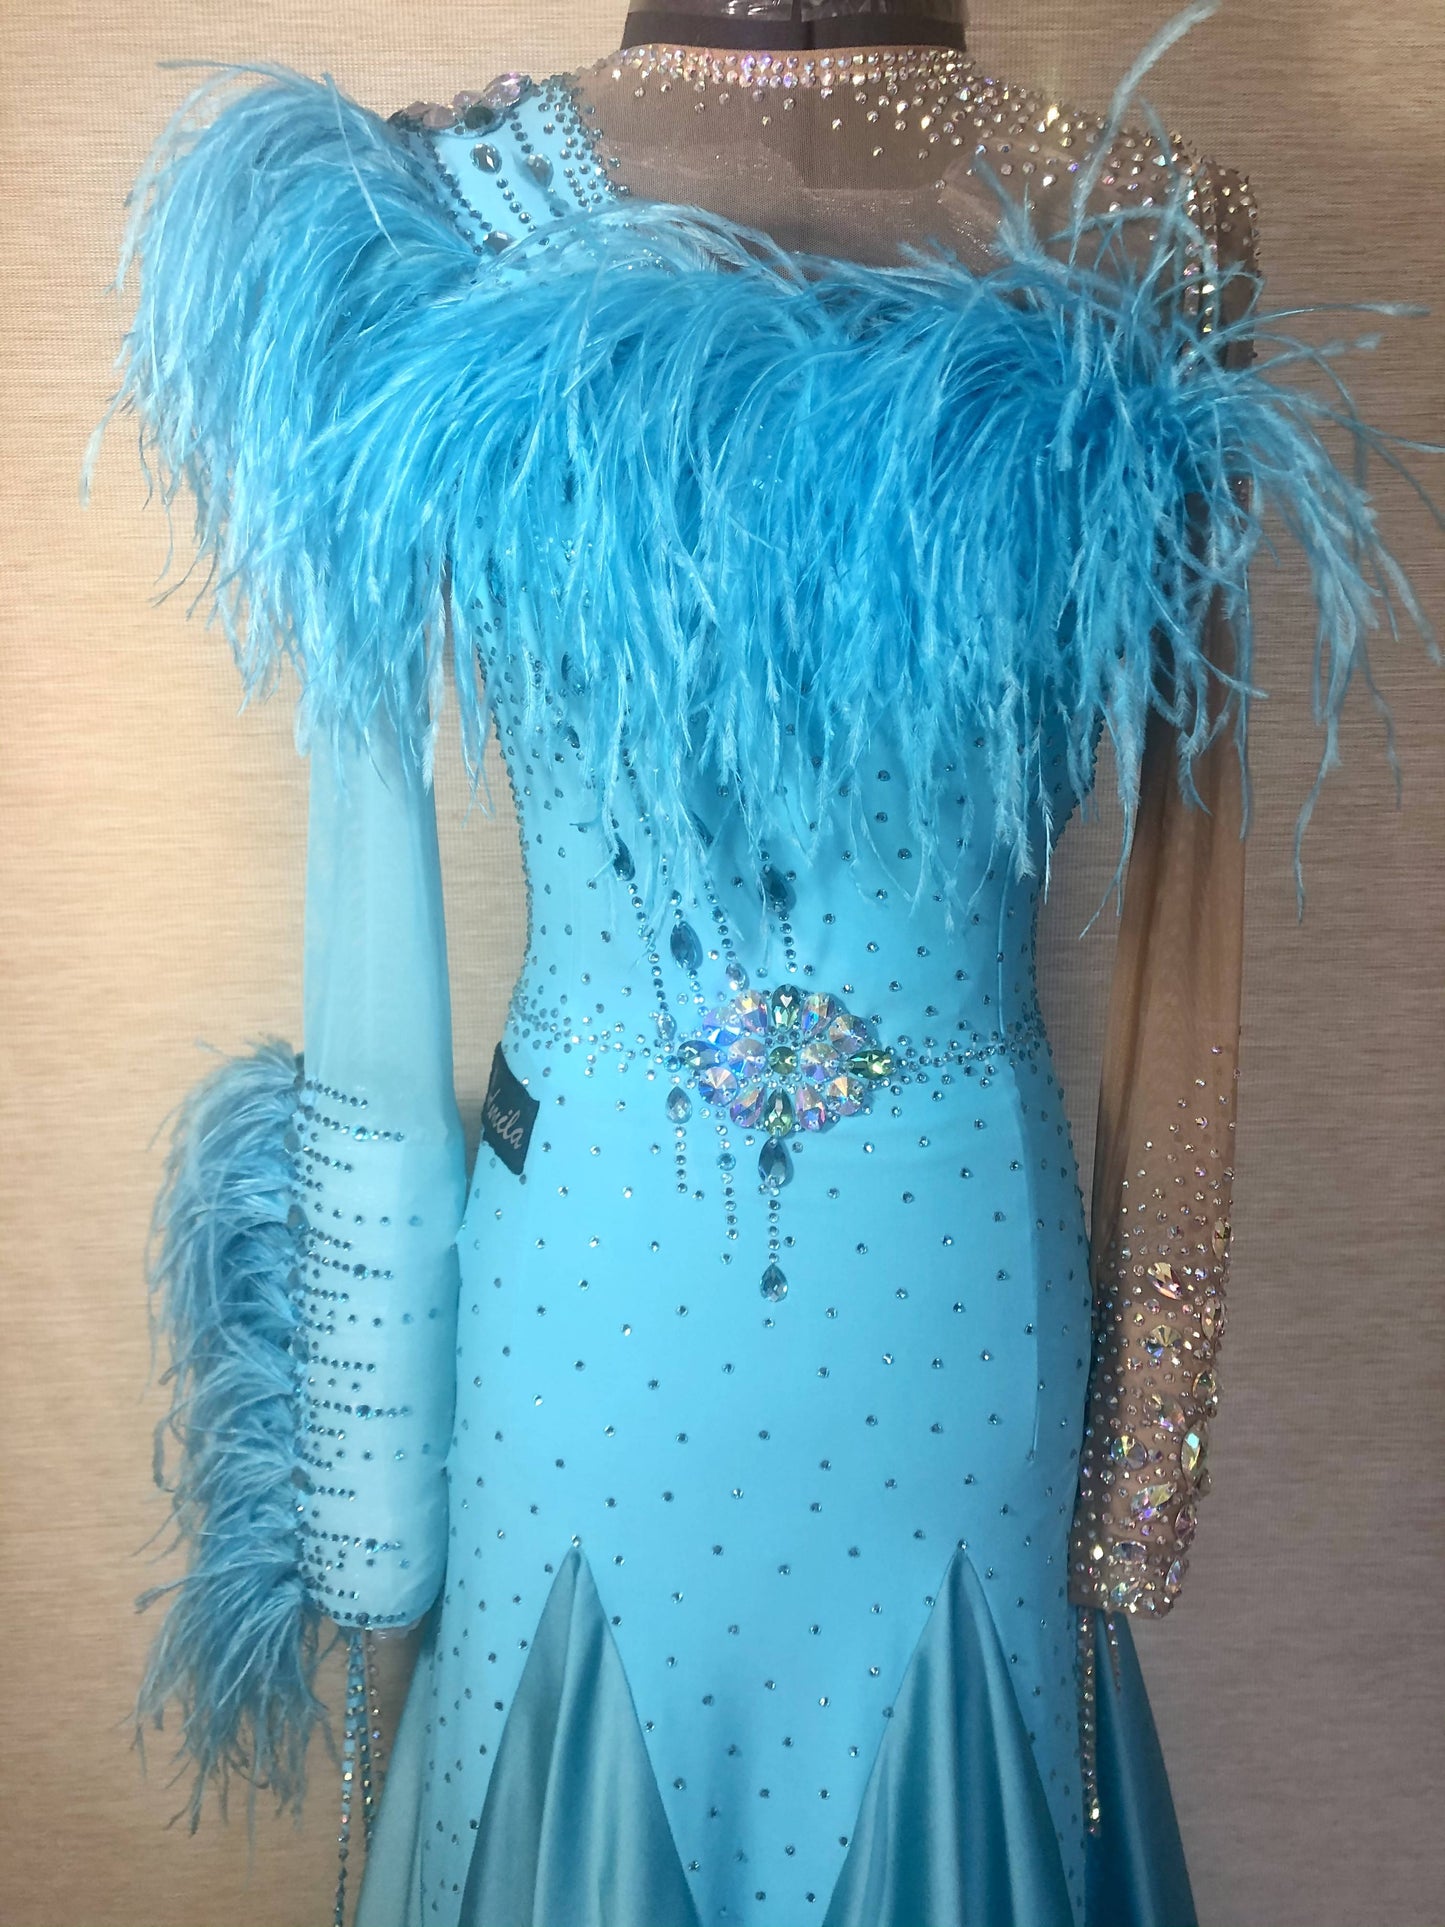 New Blue Sponsored Ballroom Dress with Feathers